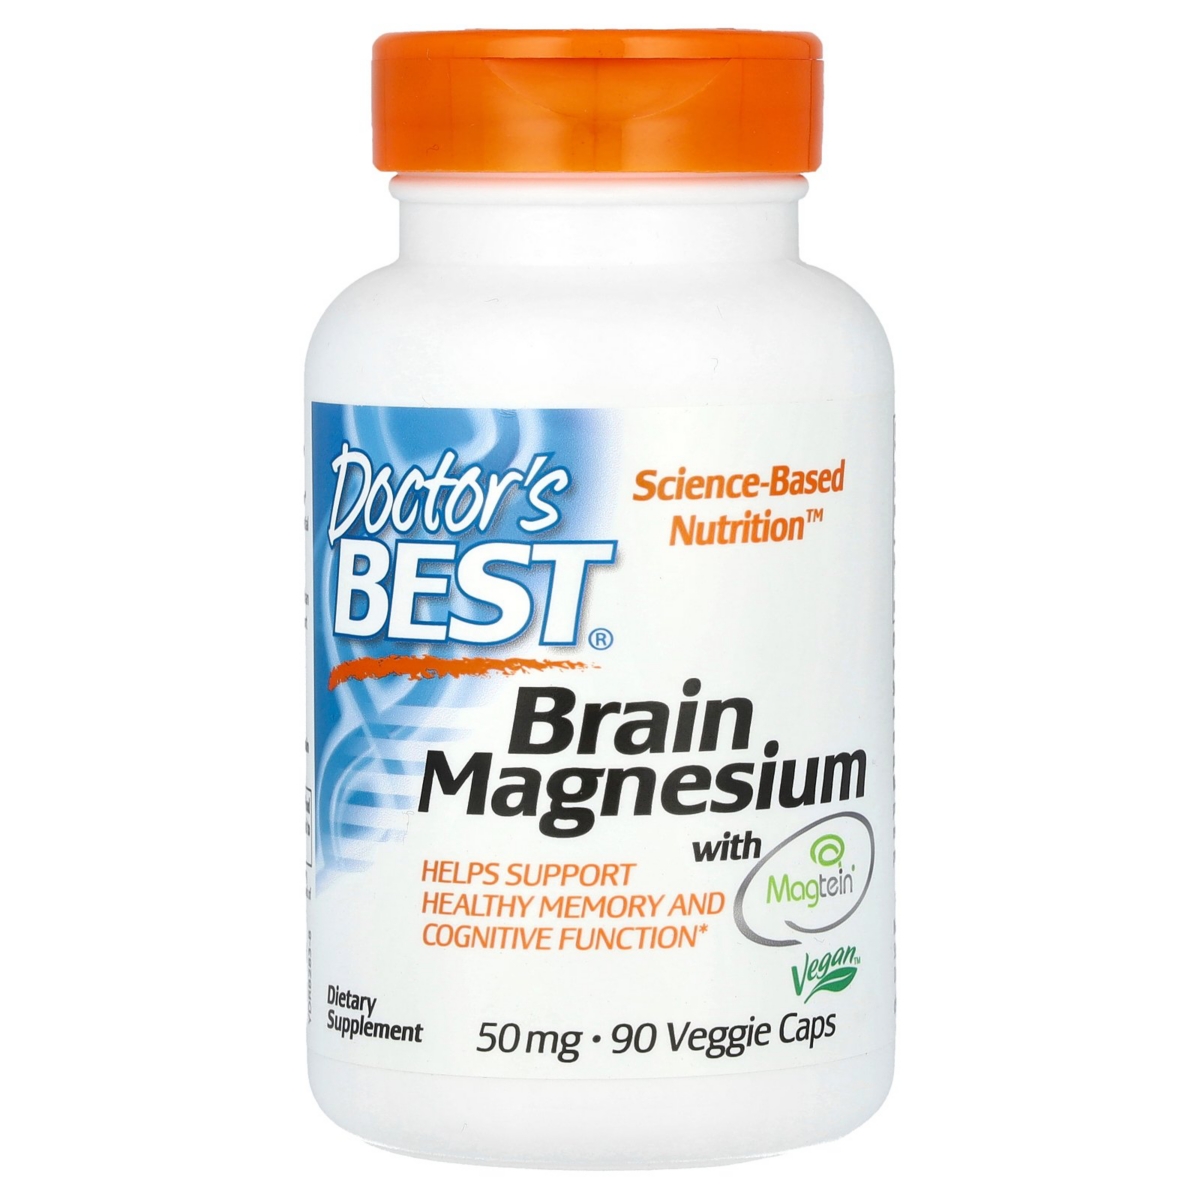 Brain Magnesium with Magtein 50 mg - 90 Veggie Caps - Assorted Pre-Pack